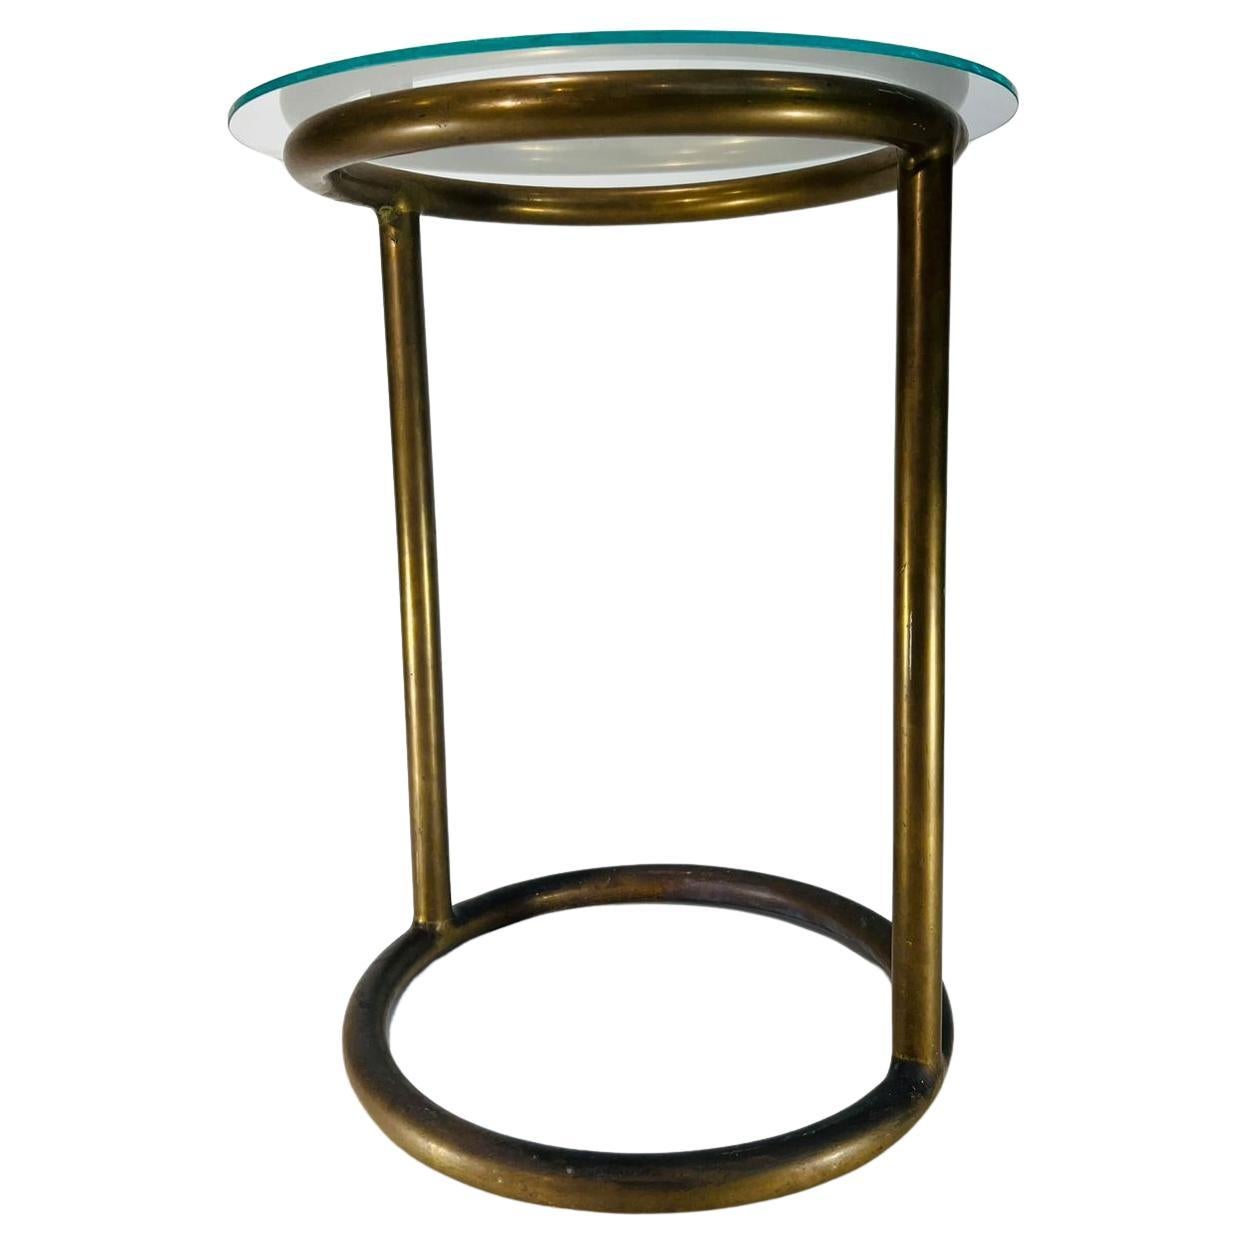 Eileen Gray side table in metal and glass circa 1930 Art Deco For Sale